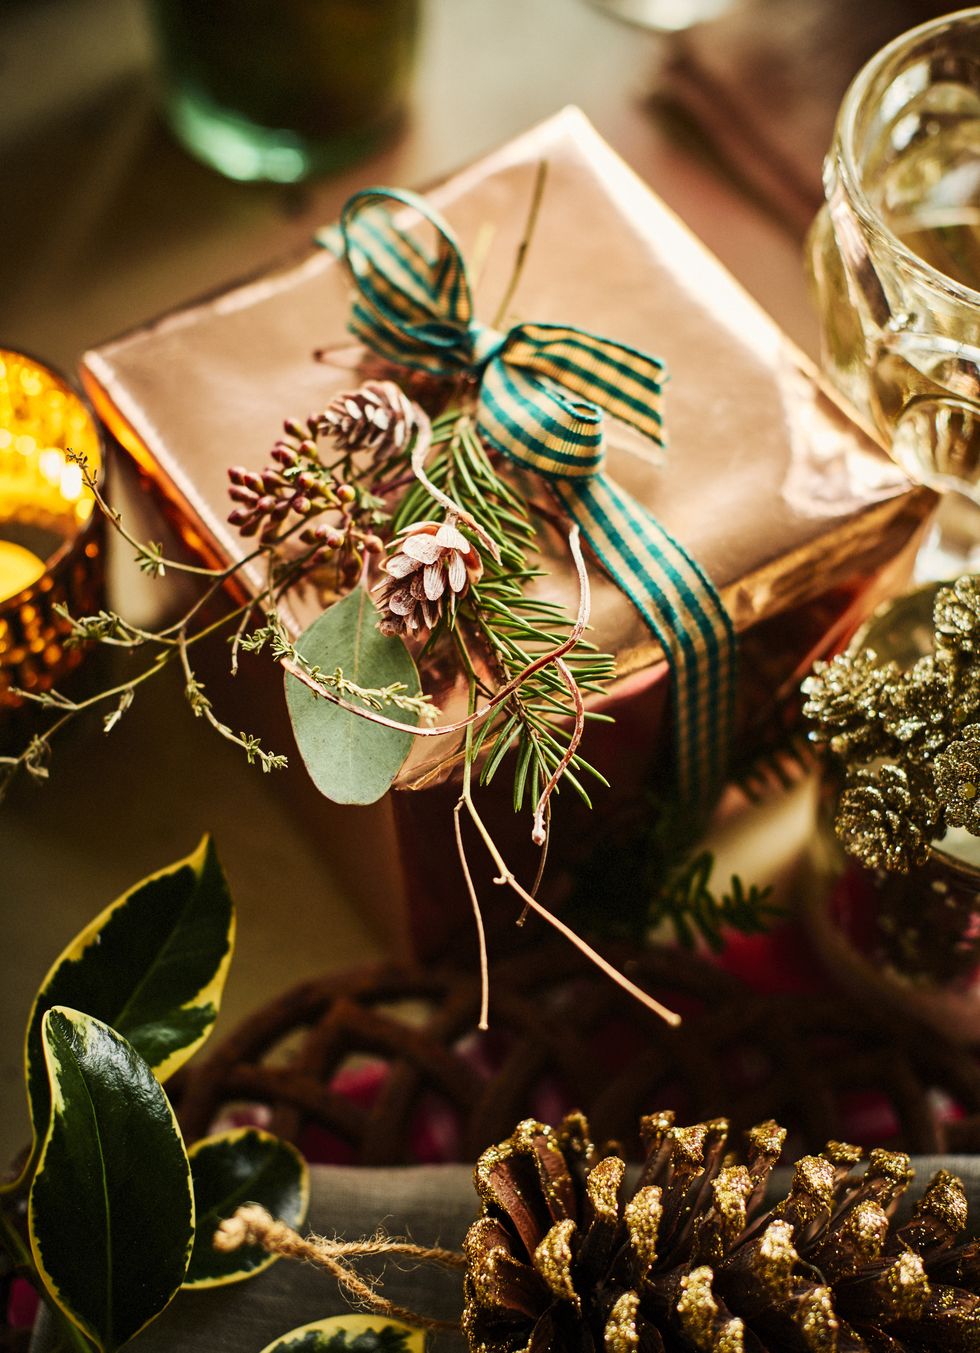 gift with rose gold wrapping paper tied with checked ribbon and a tiny corsage of twigs and cones brighten a tabletop with large gold sprayed cones